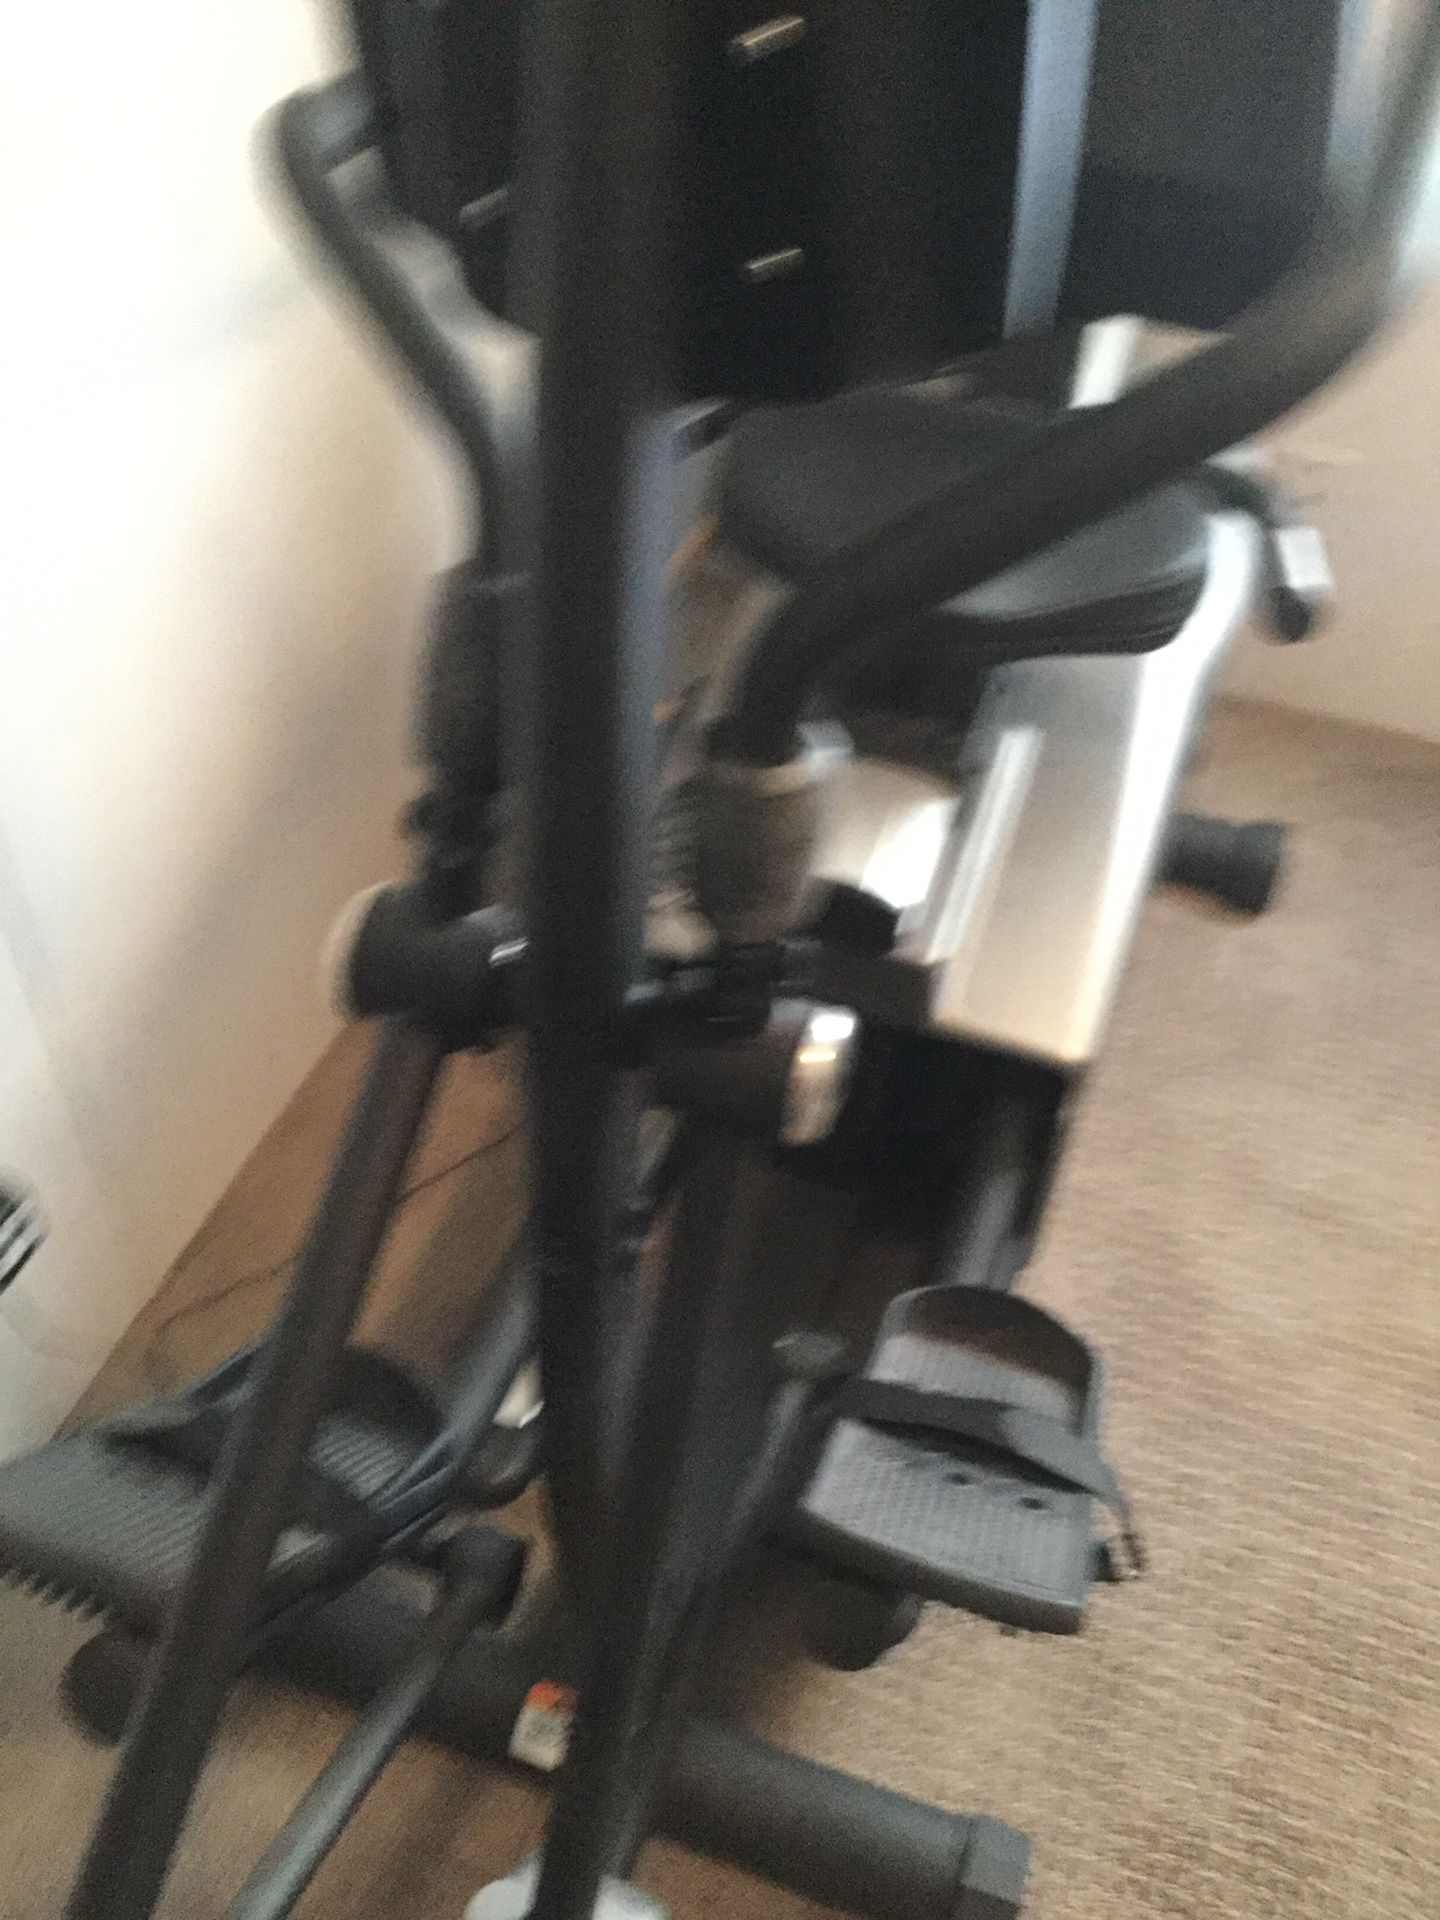 Exercise equipment two years old